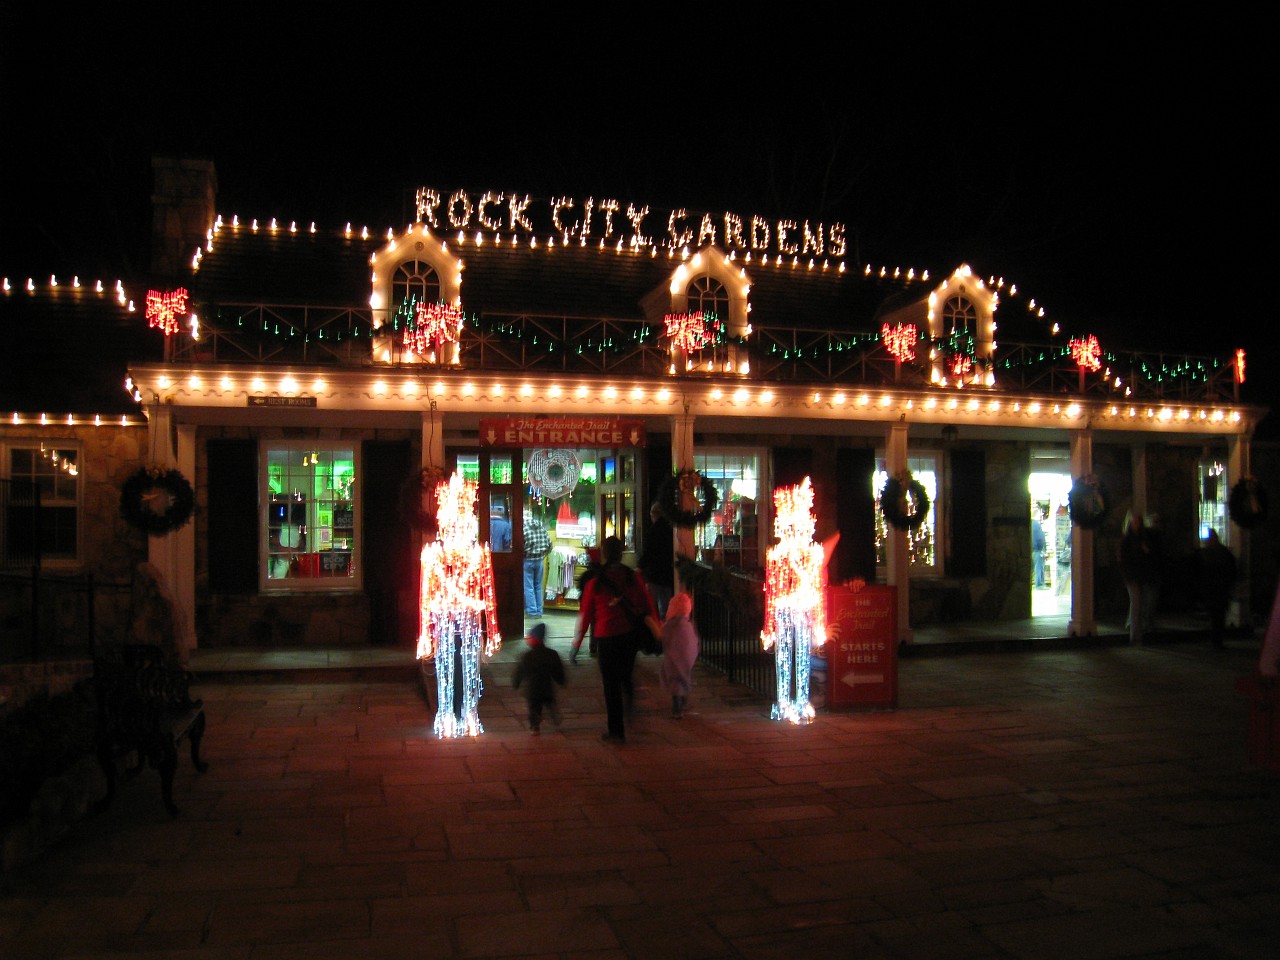 Vacation 2007-12 - Rock City 0028.jpg - Rock City outside of Chattanooga Tennessee has been a tourist attraction since 1932. I remembered seeing barn roofs painted with "See Rock City" and wanted to pay a visit to its home on Lookout Mountain. Christmas Vacation 2007-08.